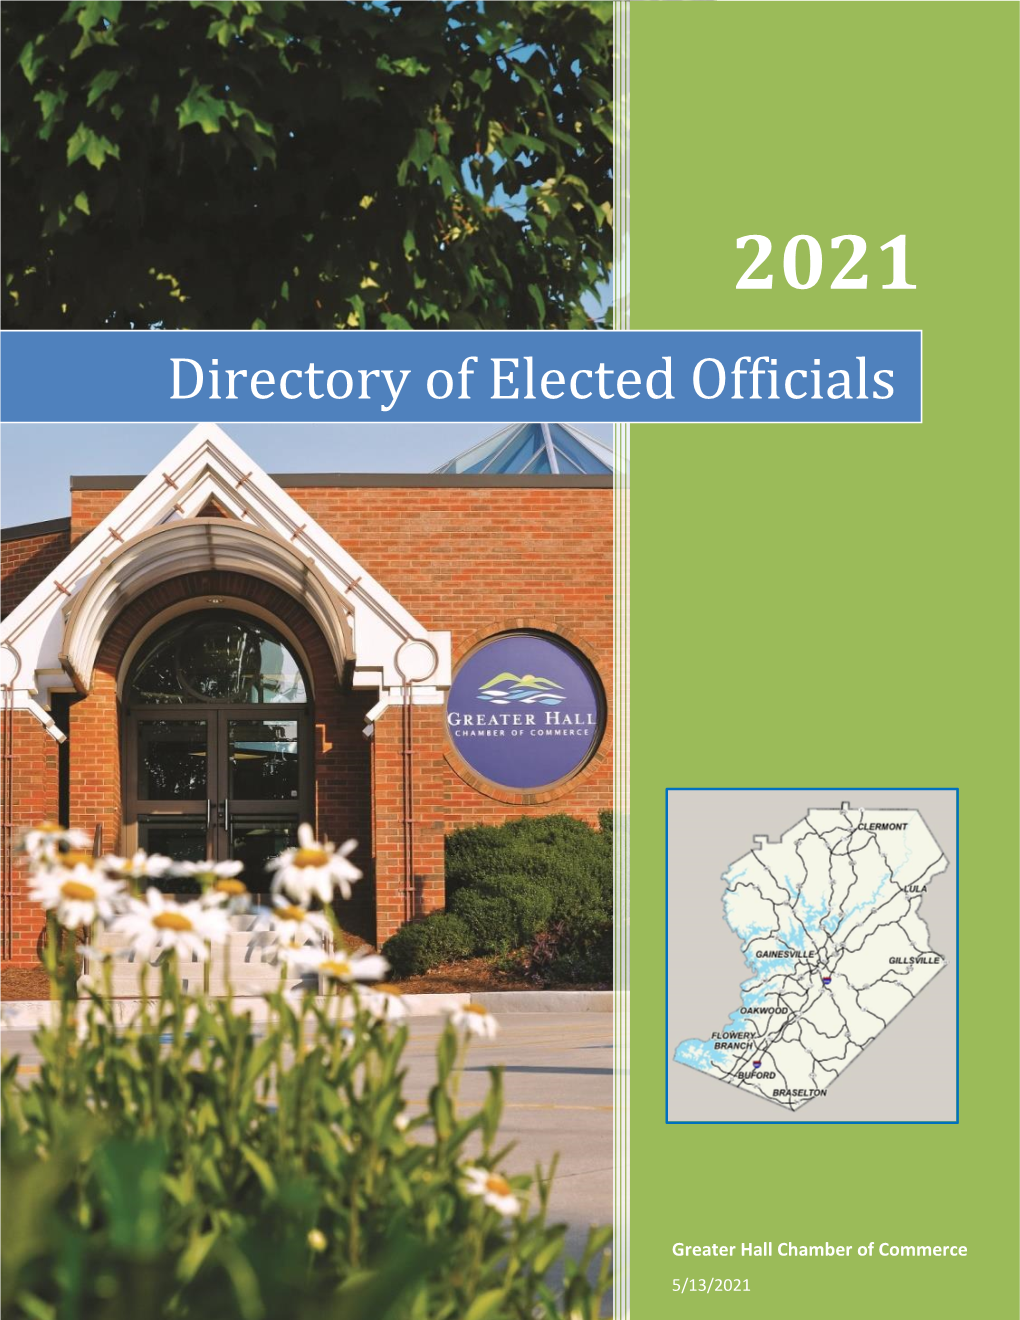 2021 Elected Officials Directory